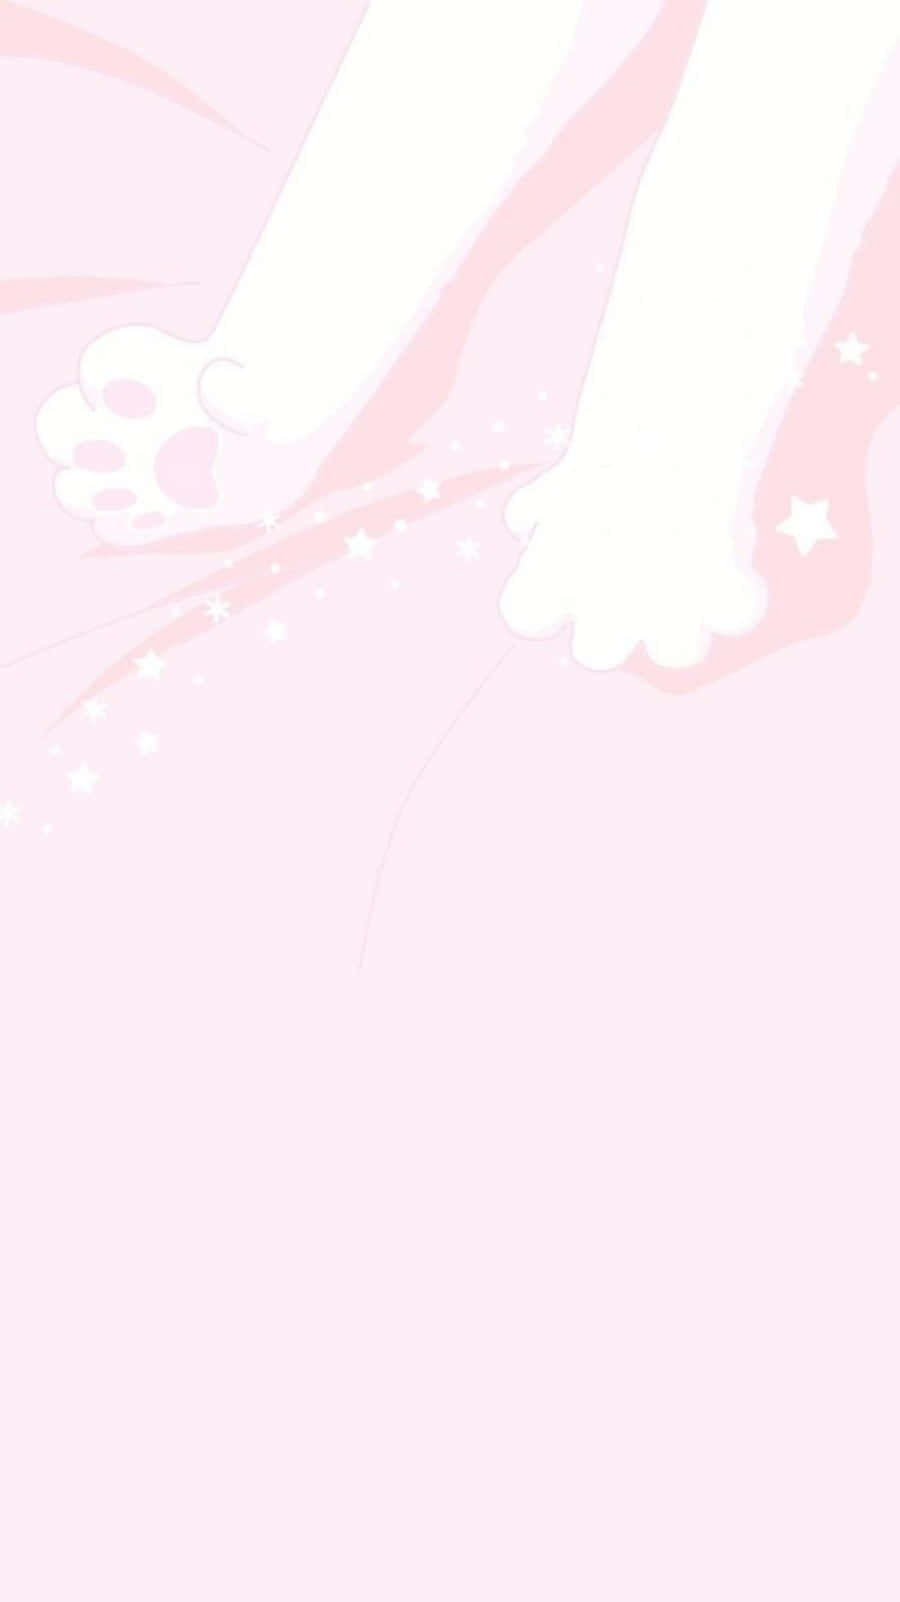 Aesthetic Pink Kawaii Cat's White Paws Wallpaper